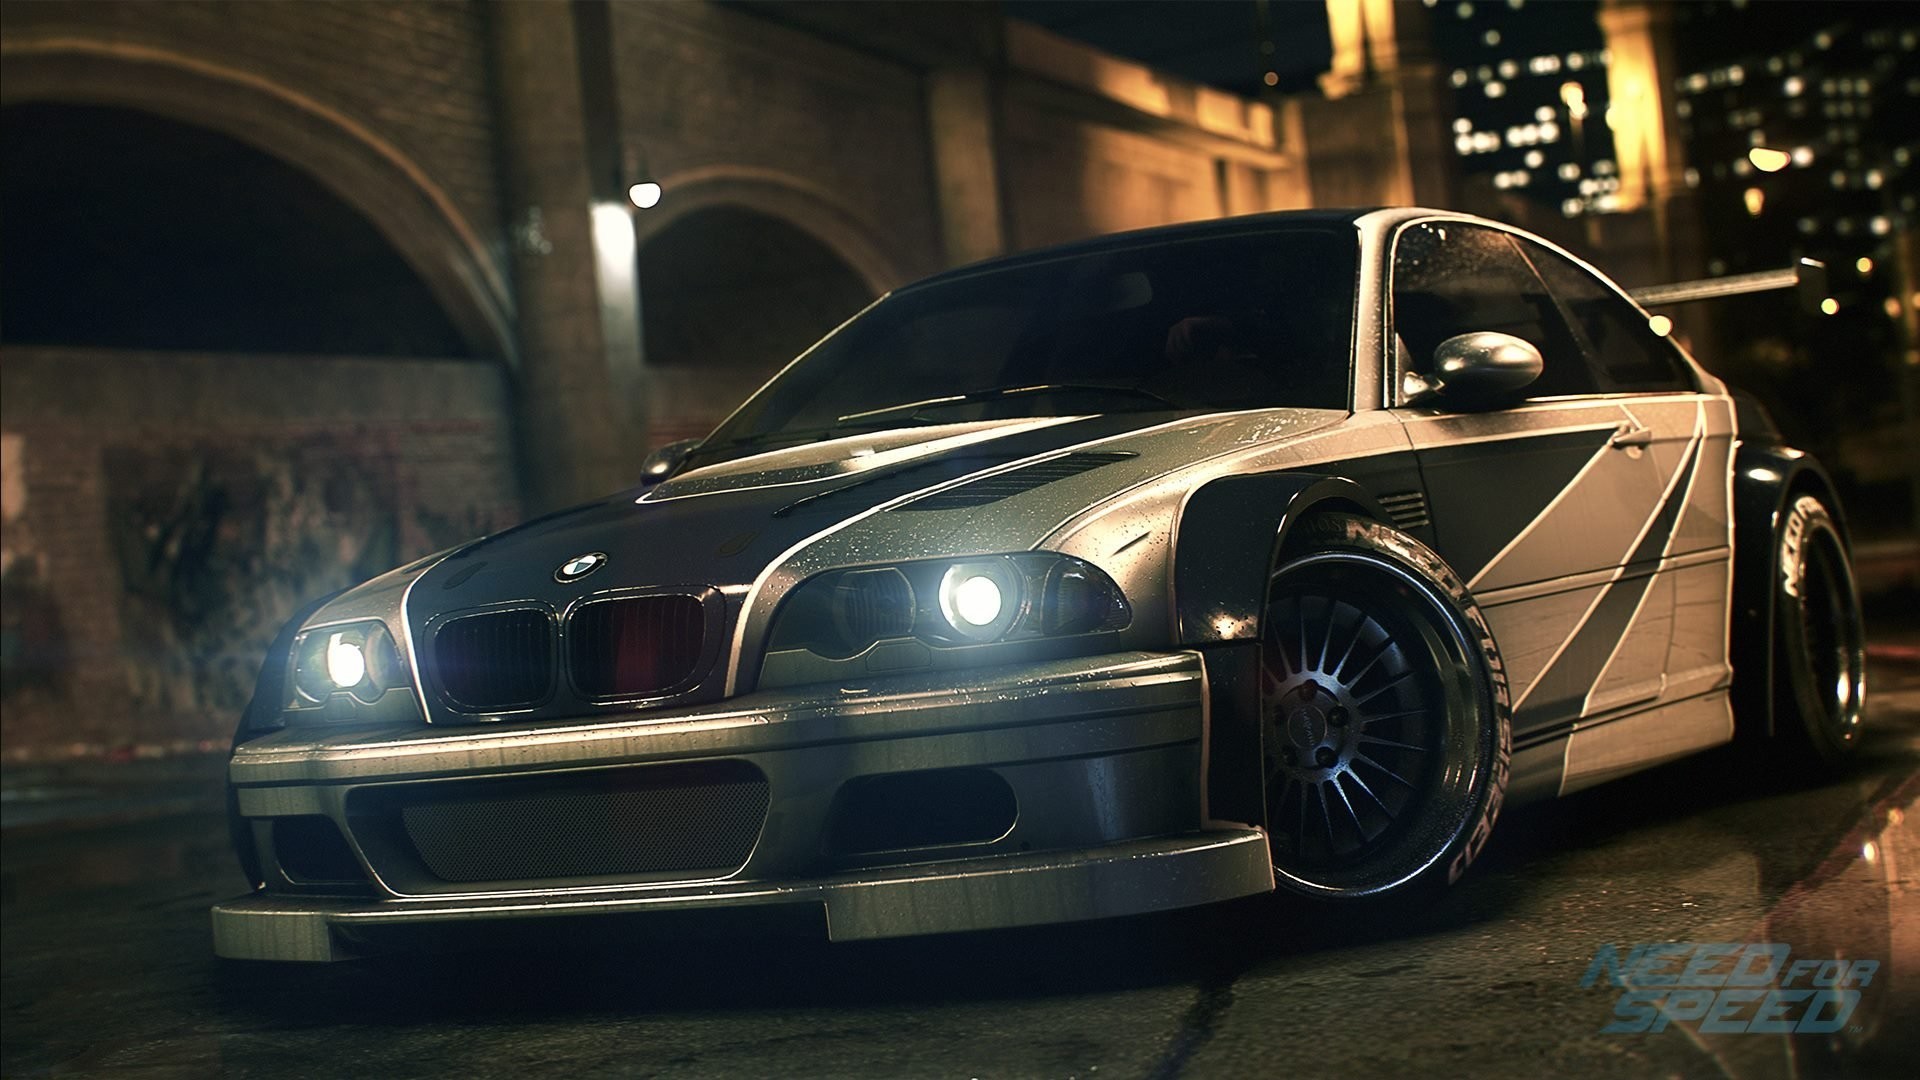 1920x1080, Backgrounds Need For Speed Most Wanted Cars - Need For Speed Most Wanted Wallpaper Hd - HD Wallpaper 